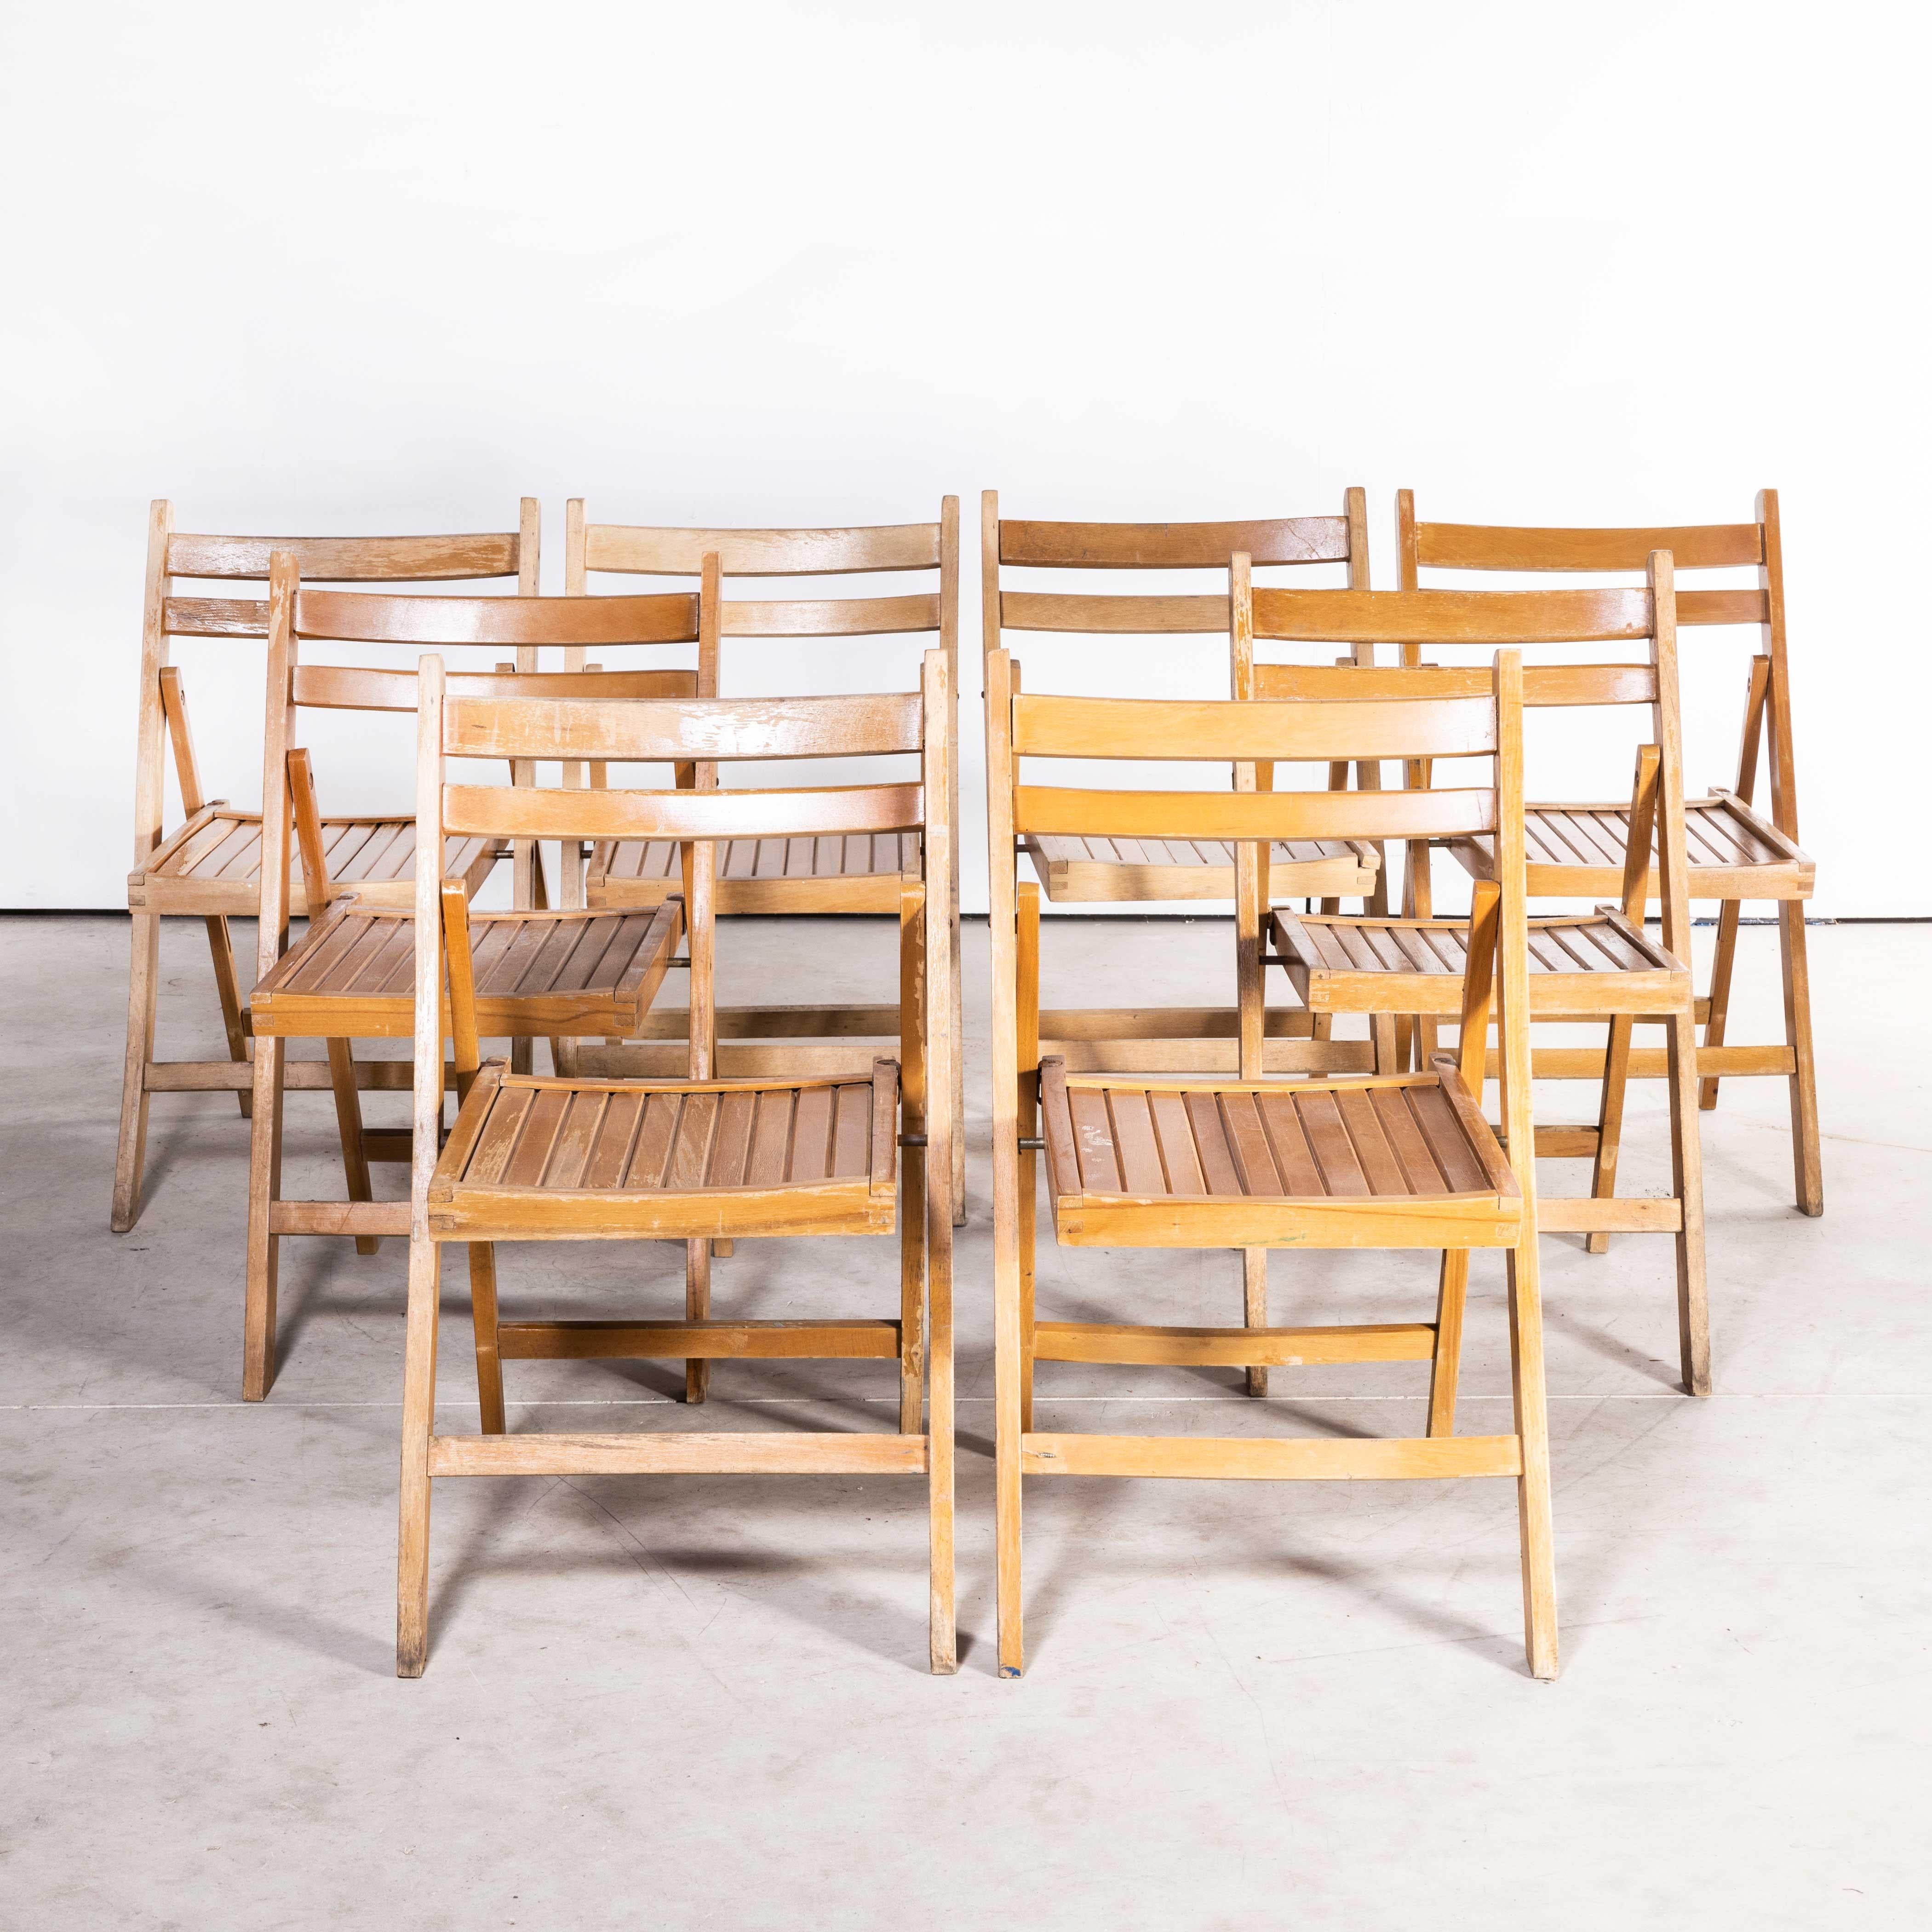 1960s beech folding chairs – set of eight – (model 2178)
1960s beech folding chairs – set of eight – (model 2178). Good practical classic folding chairs originally made in Germany of solid beech. Every chair passes through our workshops where they